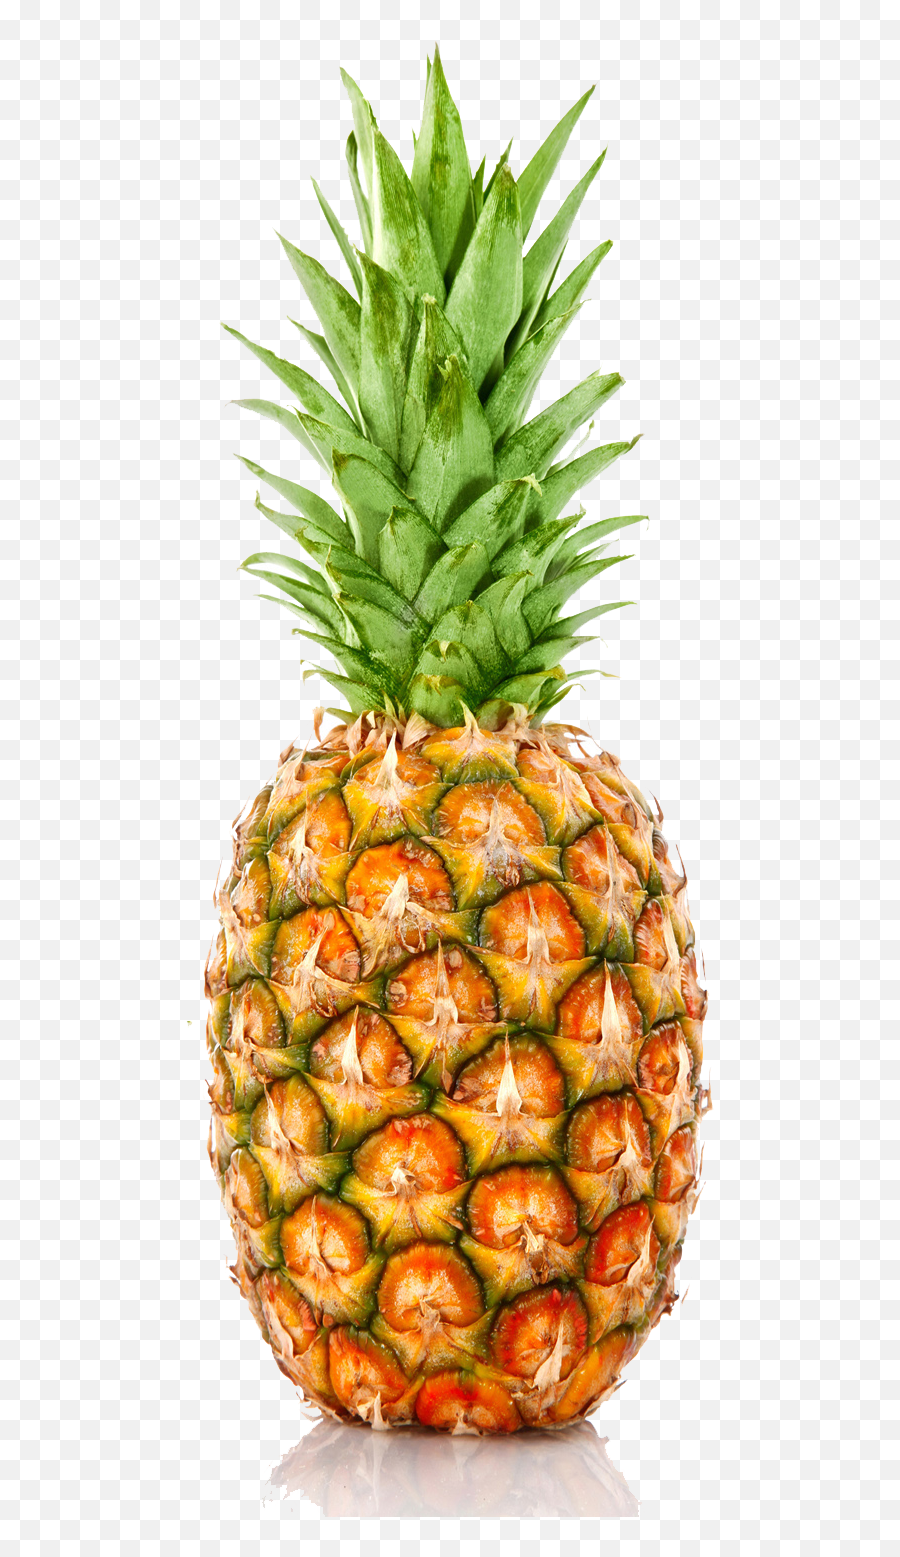 Free Pineapple Outline Png Download Free Clip Art Free - Fruits And Vegetables Individuals Emoji,Pineapple Clipart